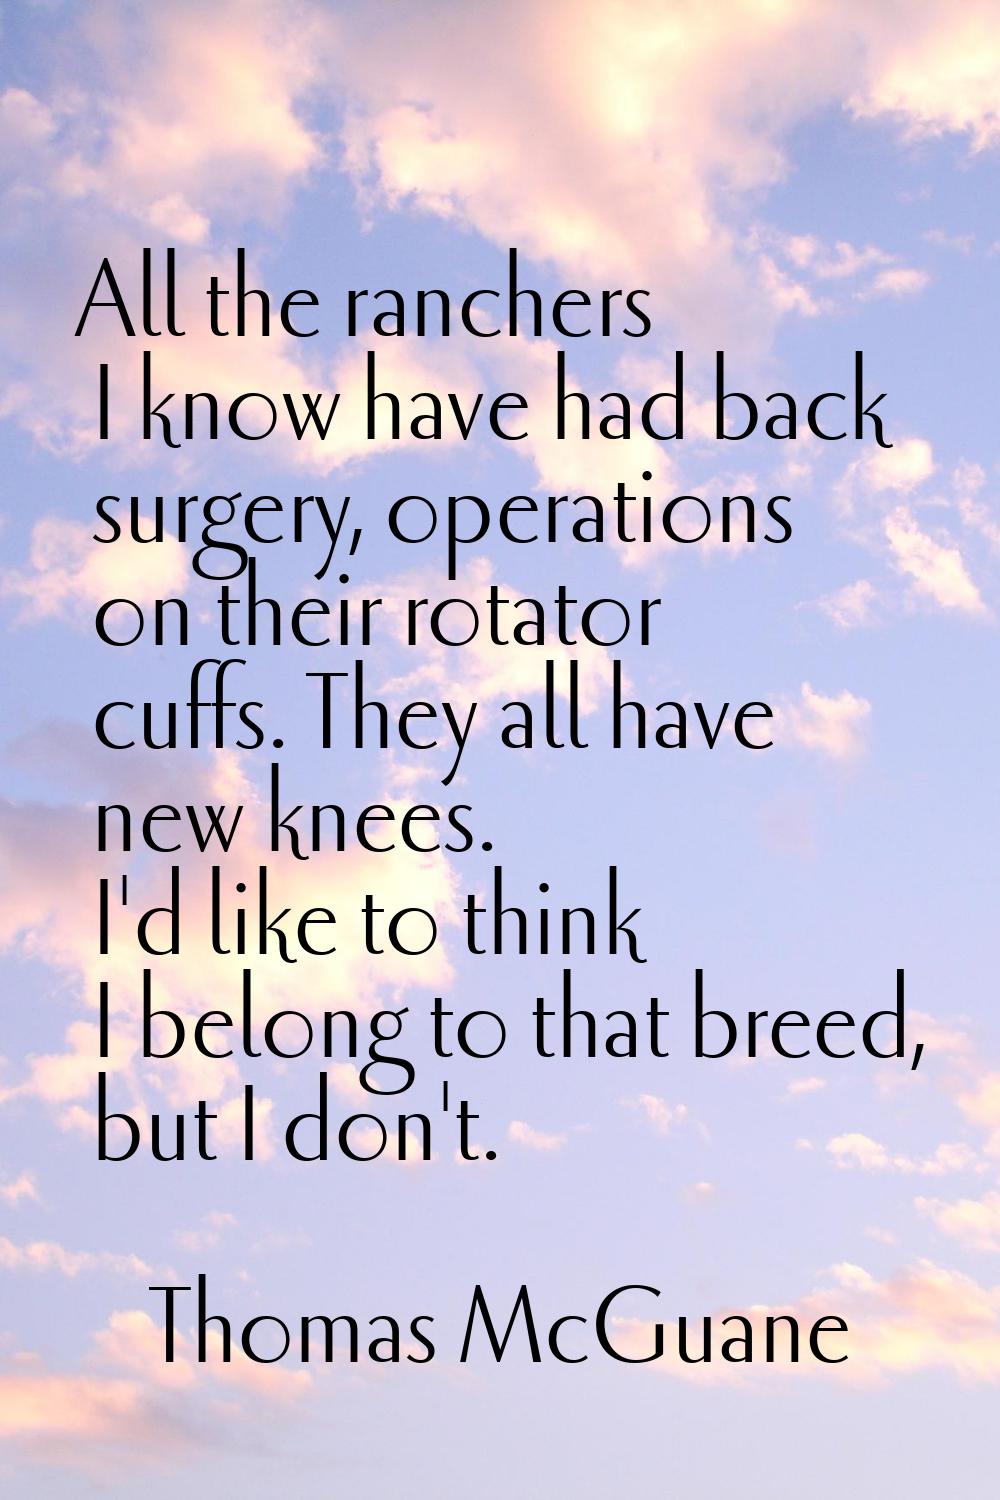 All the ranchers I know have had back surgery, operations on their rotator cuffs. They all have new